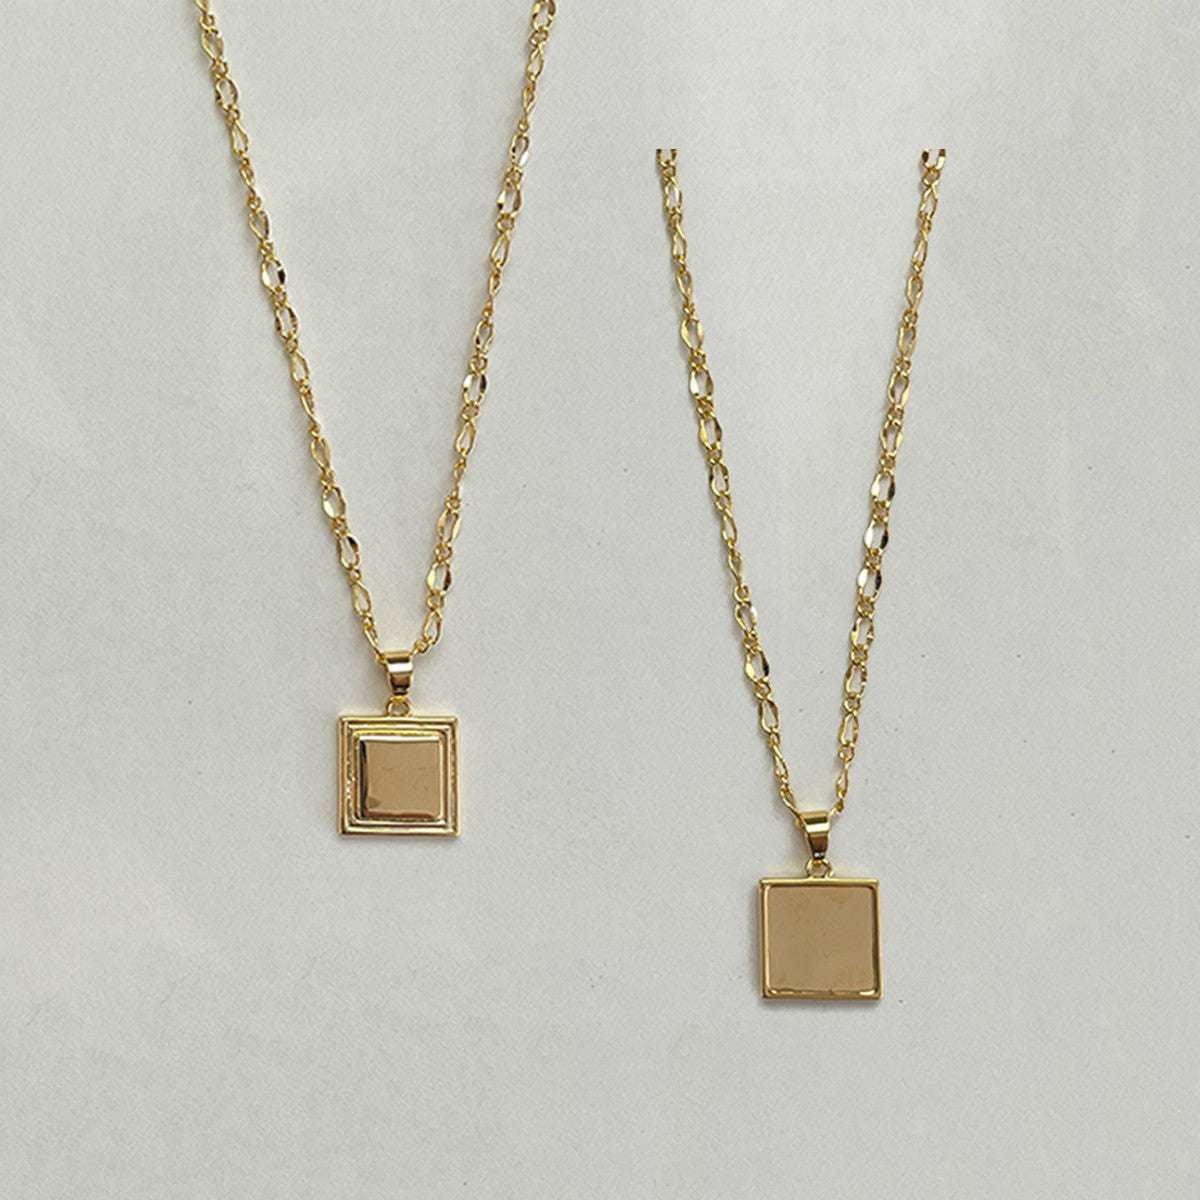 Layered Clavicle Necklace, Picture Frame Pendant, Stylish Necklace Sets - available at Sparq Mart